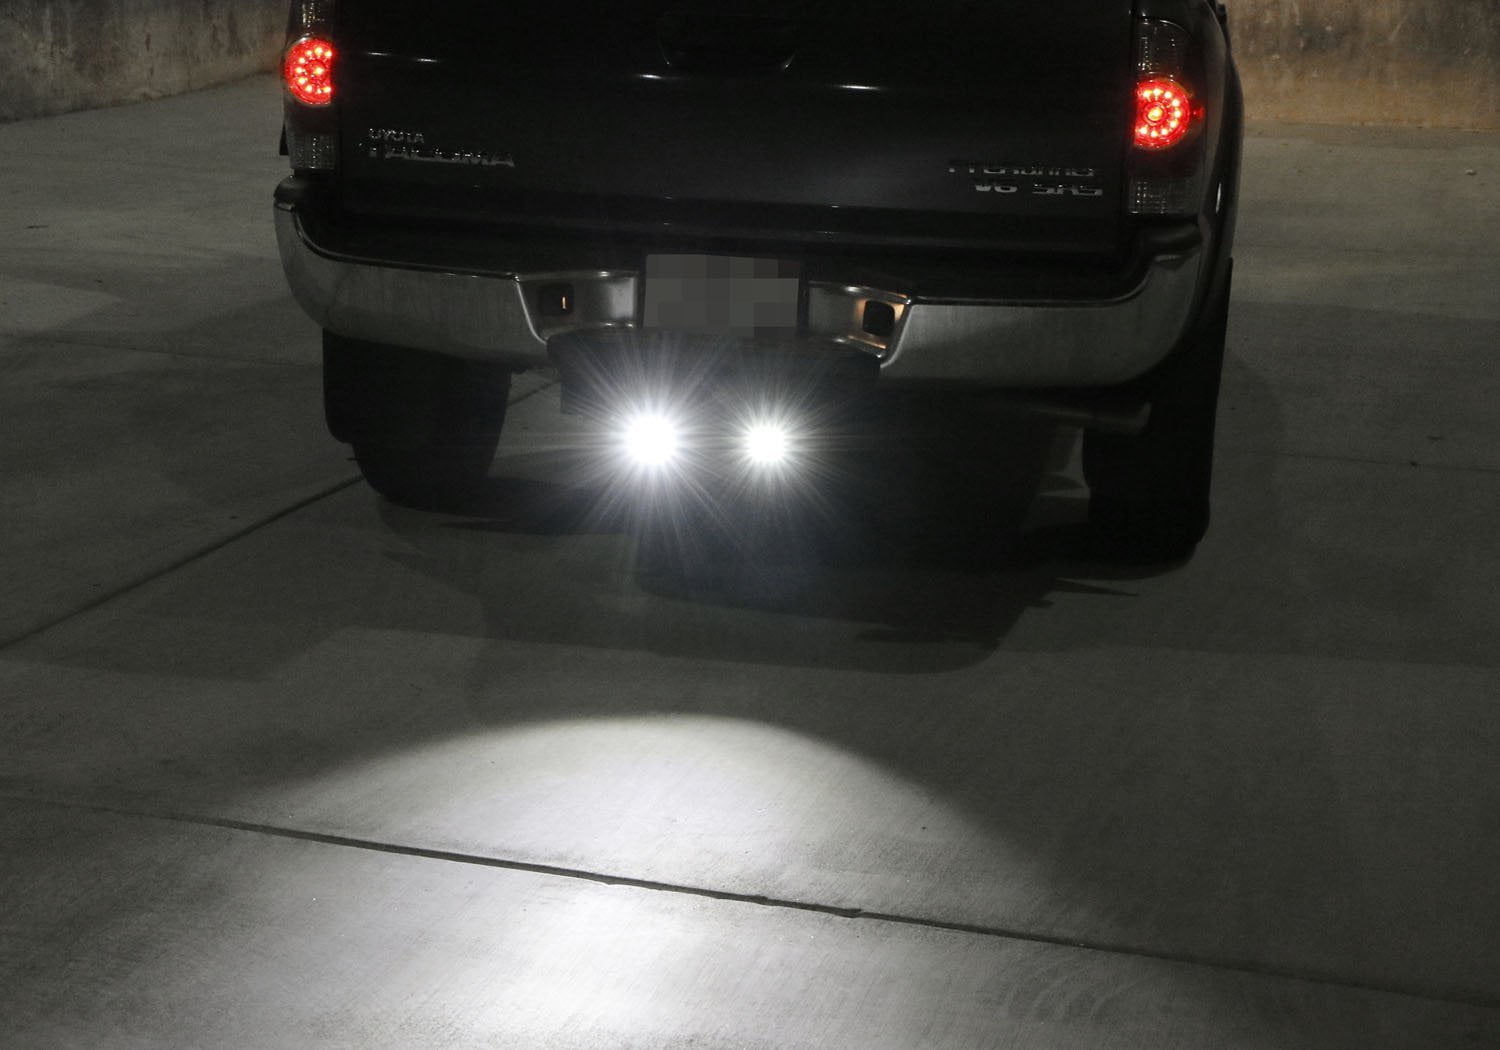 iJDMTOY Tow Hitch LED Pod Light Kit Fit for Many Truck SUV Trailer RV etc Off-Road or Search Light 20W High Power CREE LED Pod Lamps & Tow Hitch Mount Bracket Includes Use As Reverse 2 